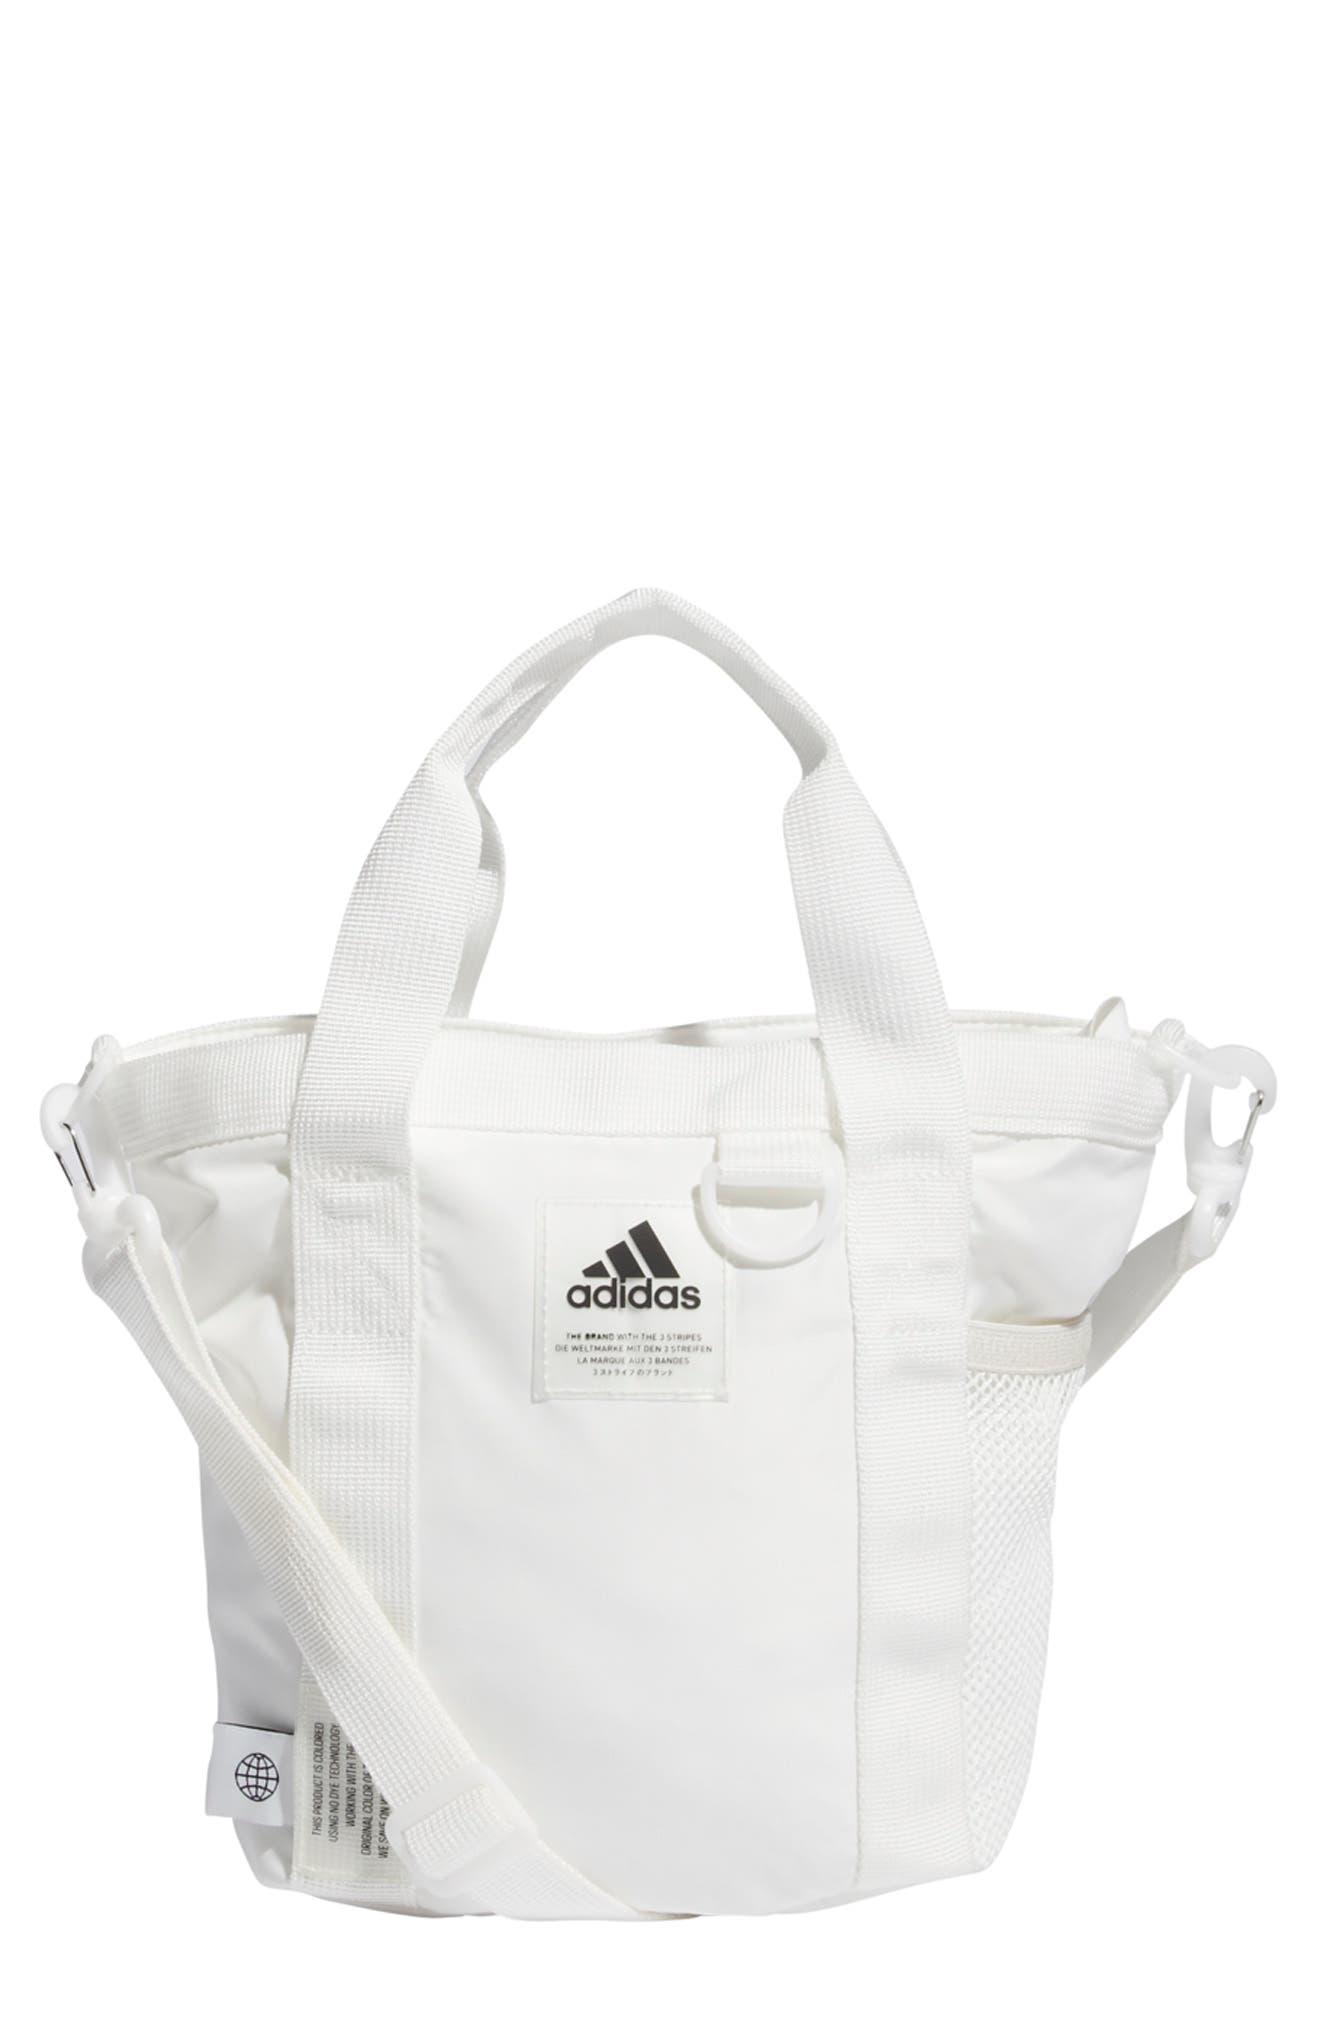 adidas Essentials Mini Tote Bag In White At Nordstrom Rack | Lyst